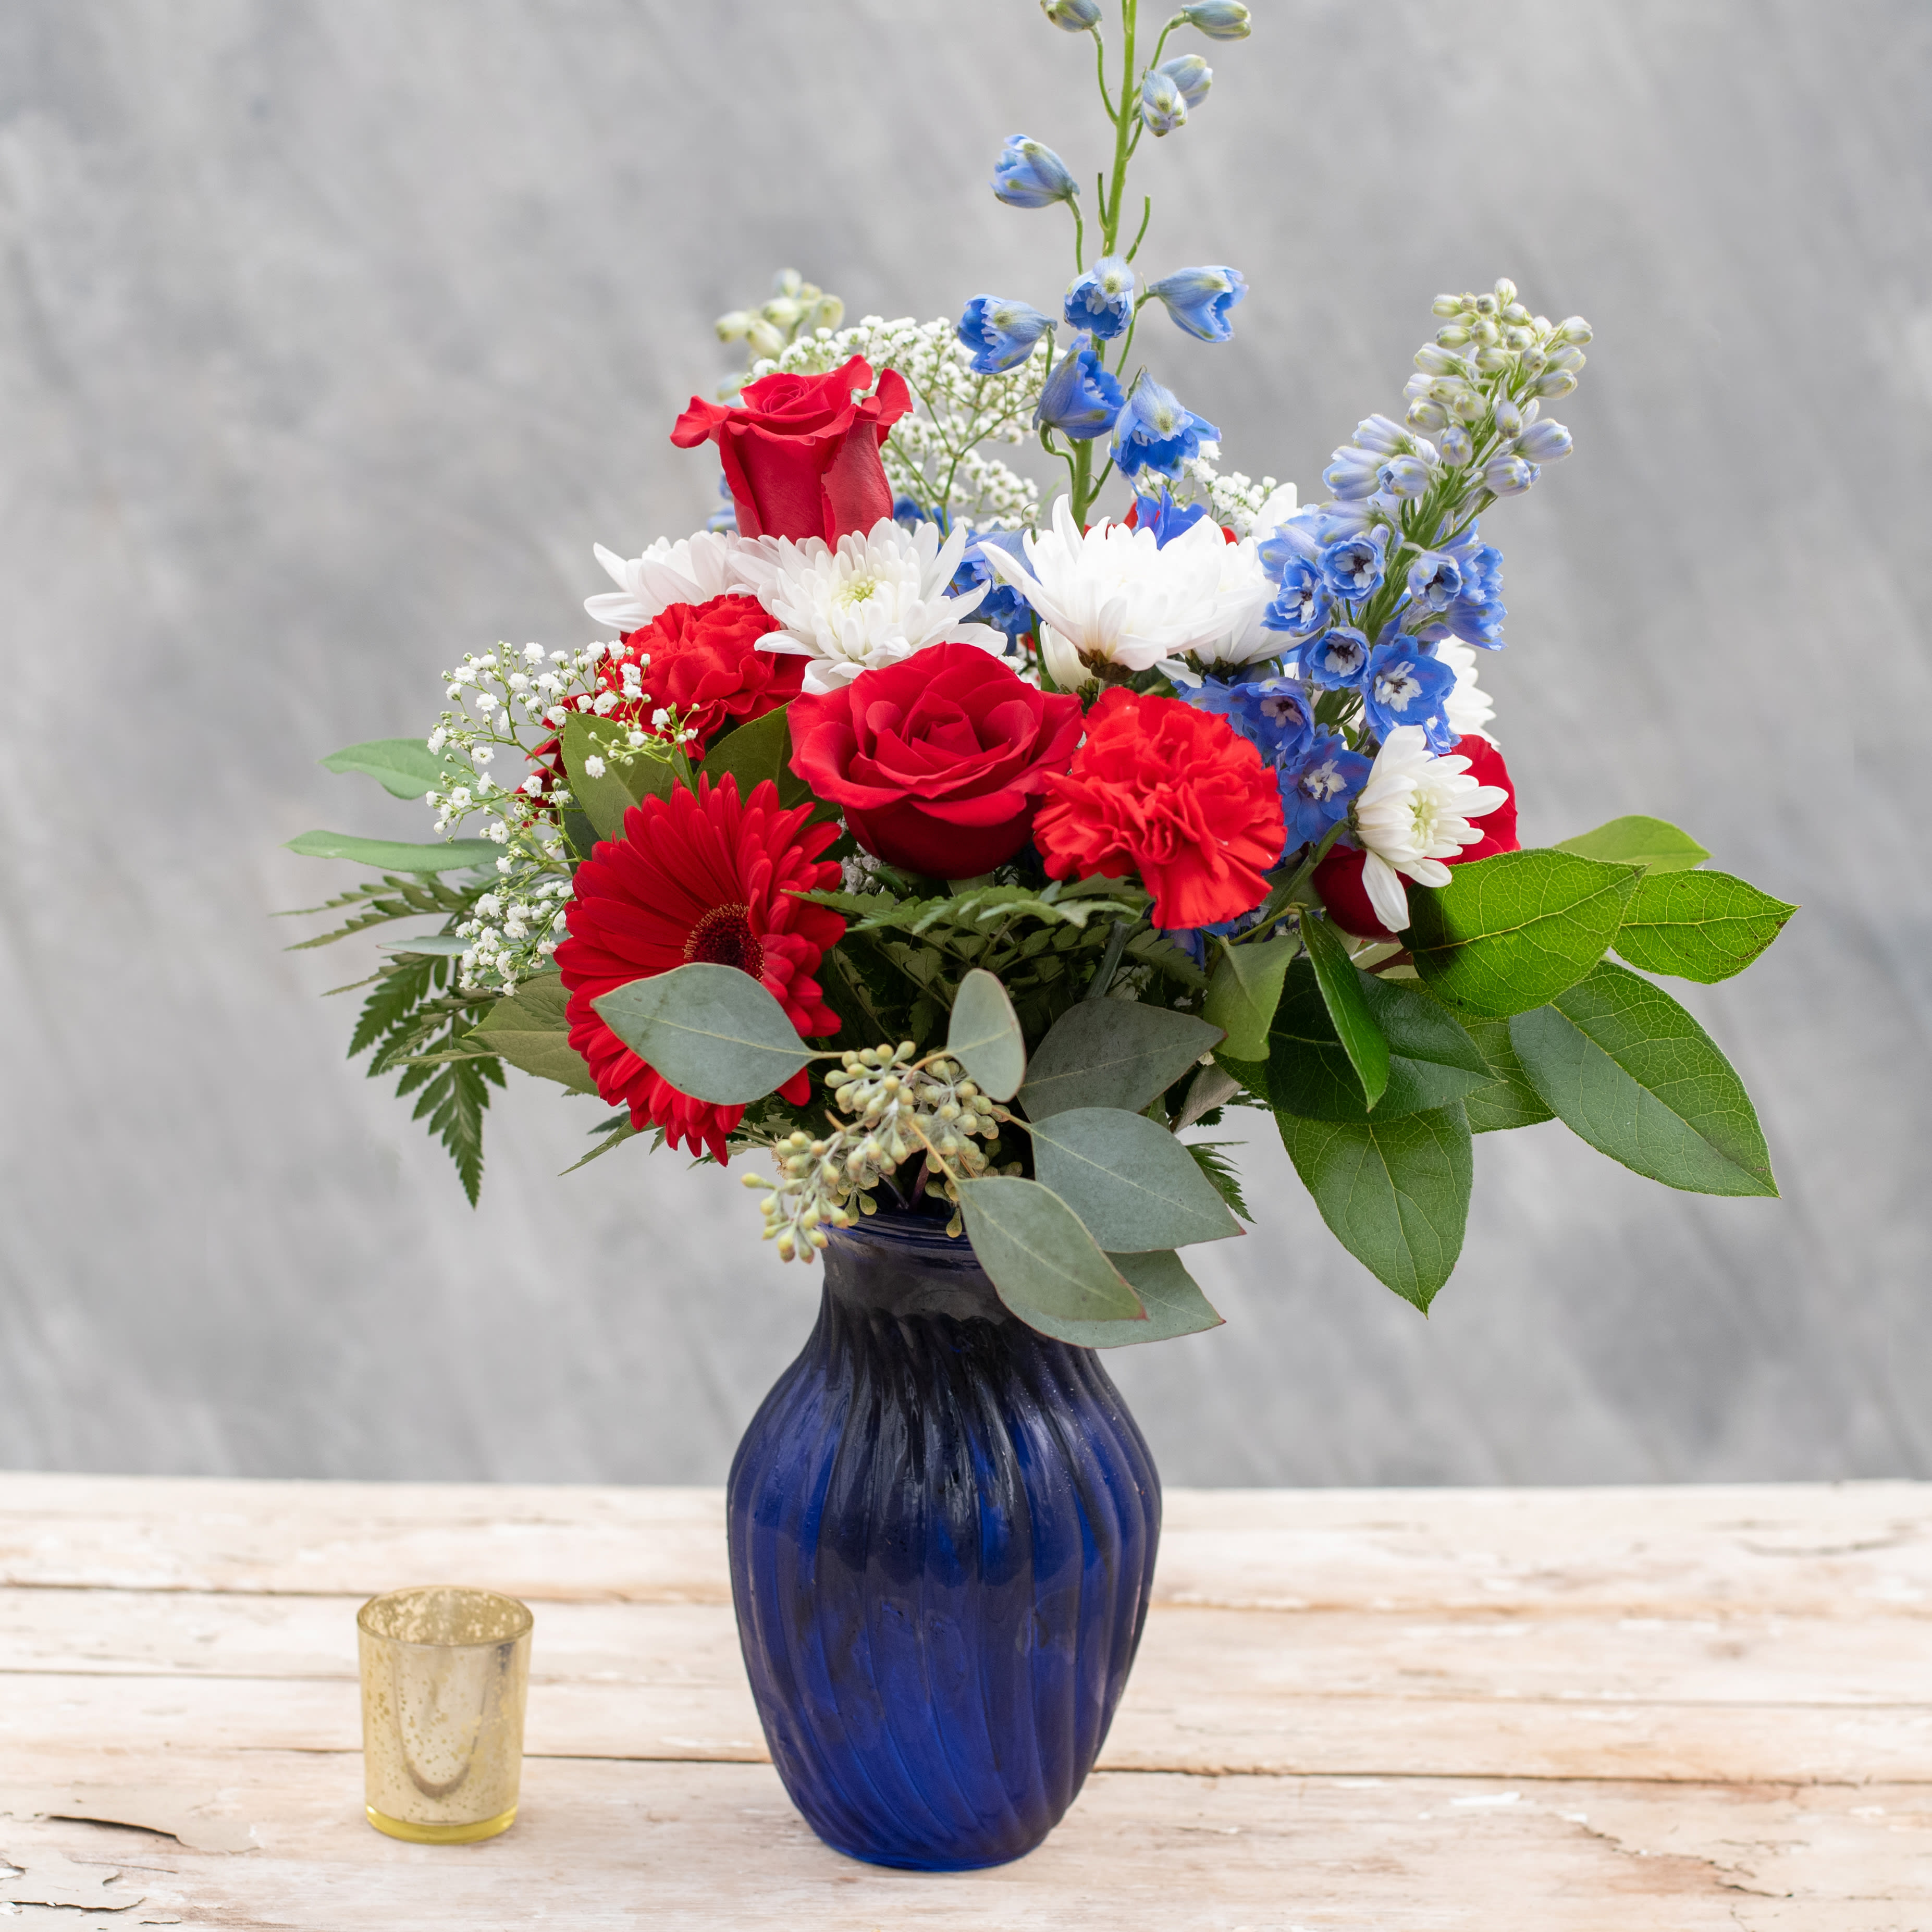 Celebrate - Whether it's Memorial Day, 4th of July, Labor Day, or someone's birthday, it's always time to Celebrate with this red, white and blue stunner. It starts with a blue vase filled with red roses, gerbera daisies, carnations, white mums, ble delpinium and ends with premium greens.  